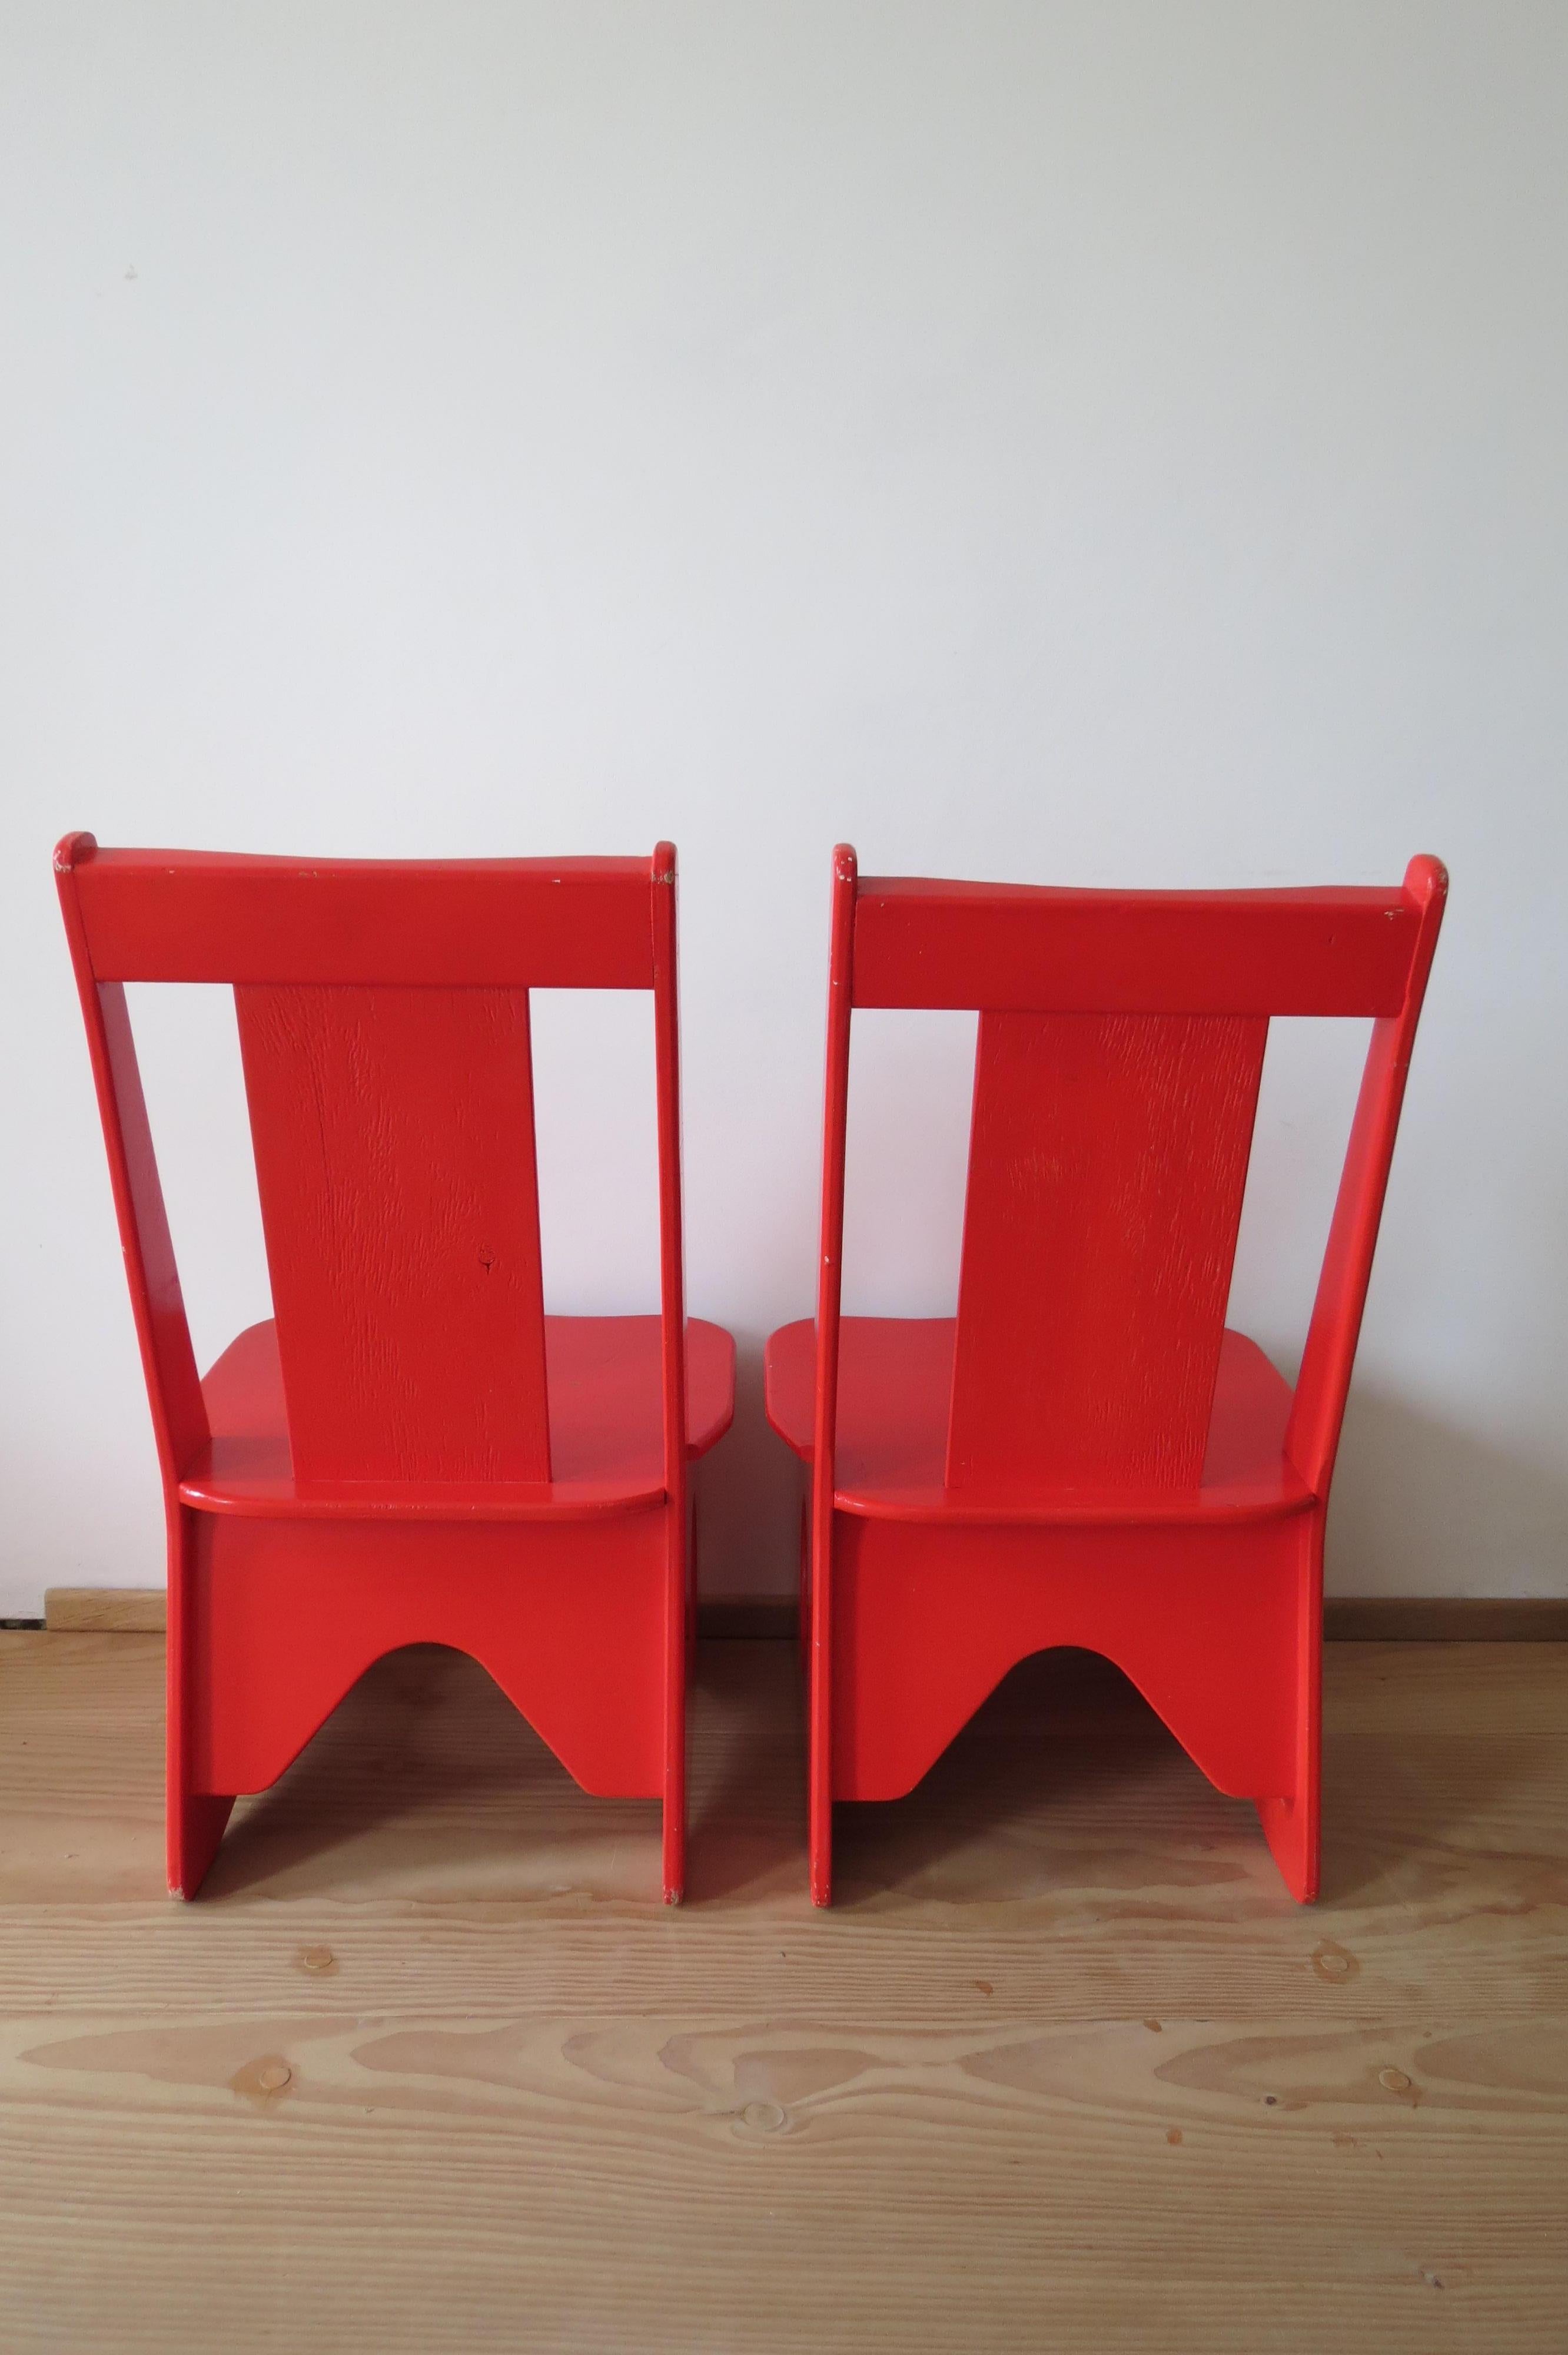 Pair of Original 1960s Red Childrens Chairs 5